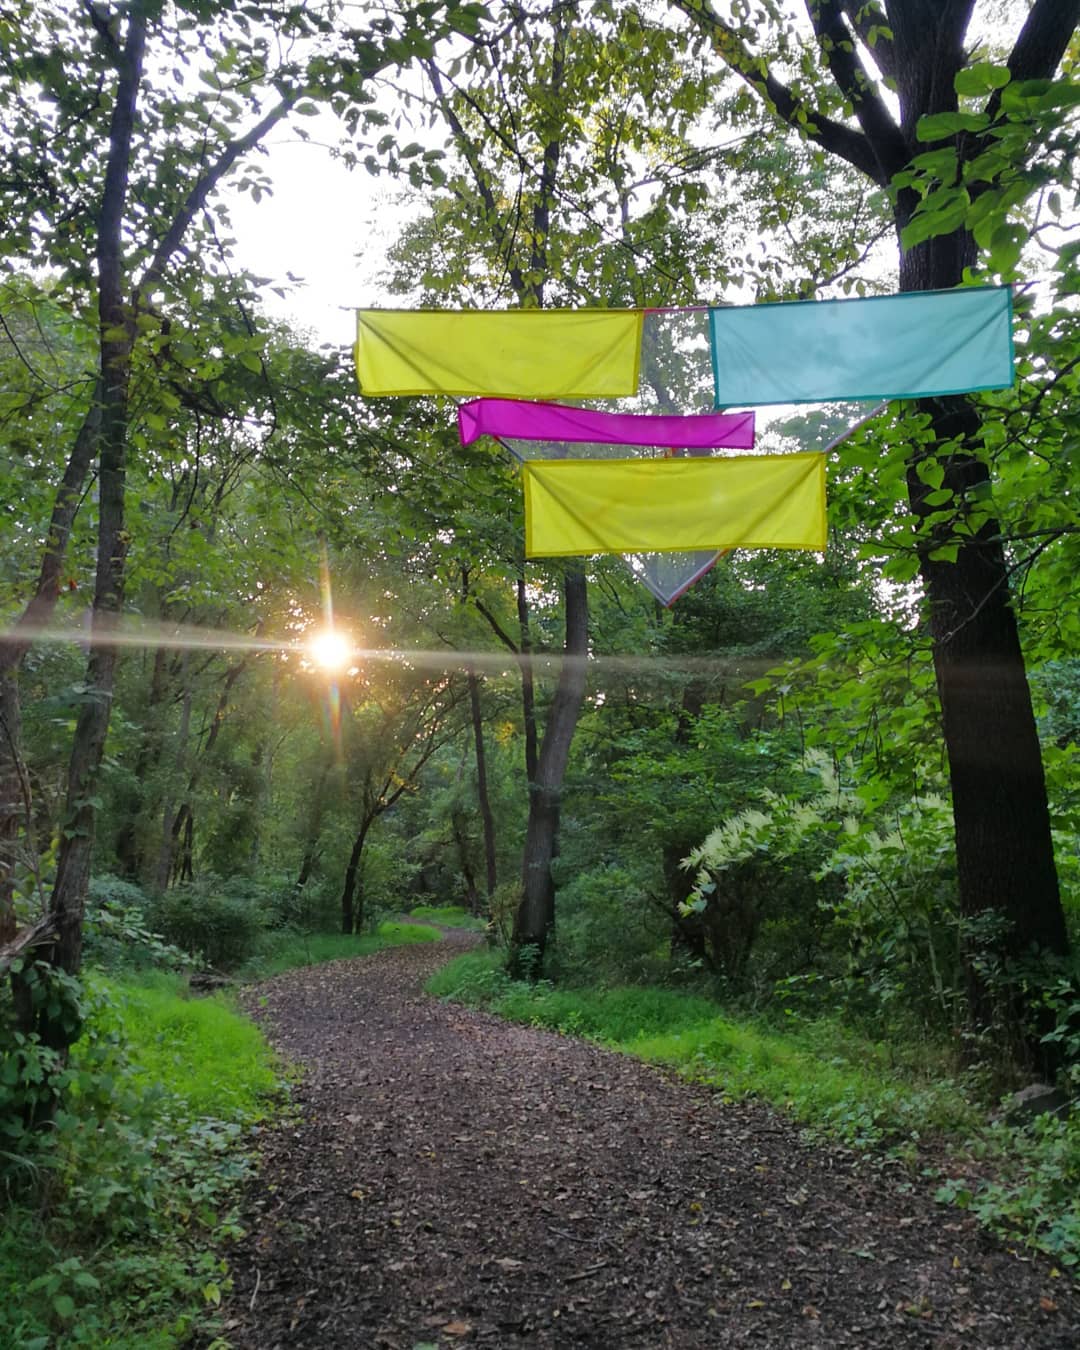 With sunlight piercing through the trees, the outdoor art installation Site Lines on the Karl Stirner Arts Trail by sculptor Rachel Hayes features colorful construction mesh and nylon flag fabric.